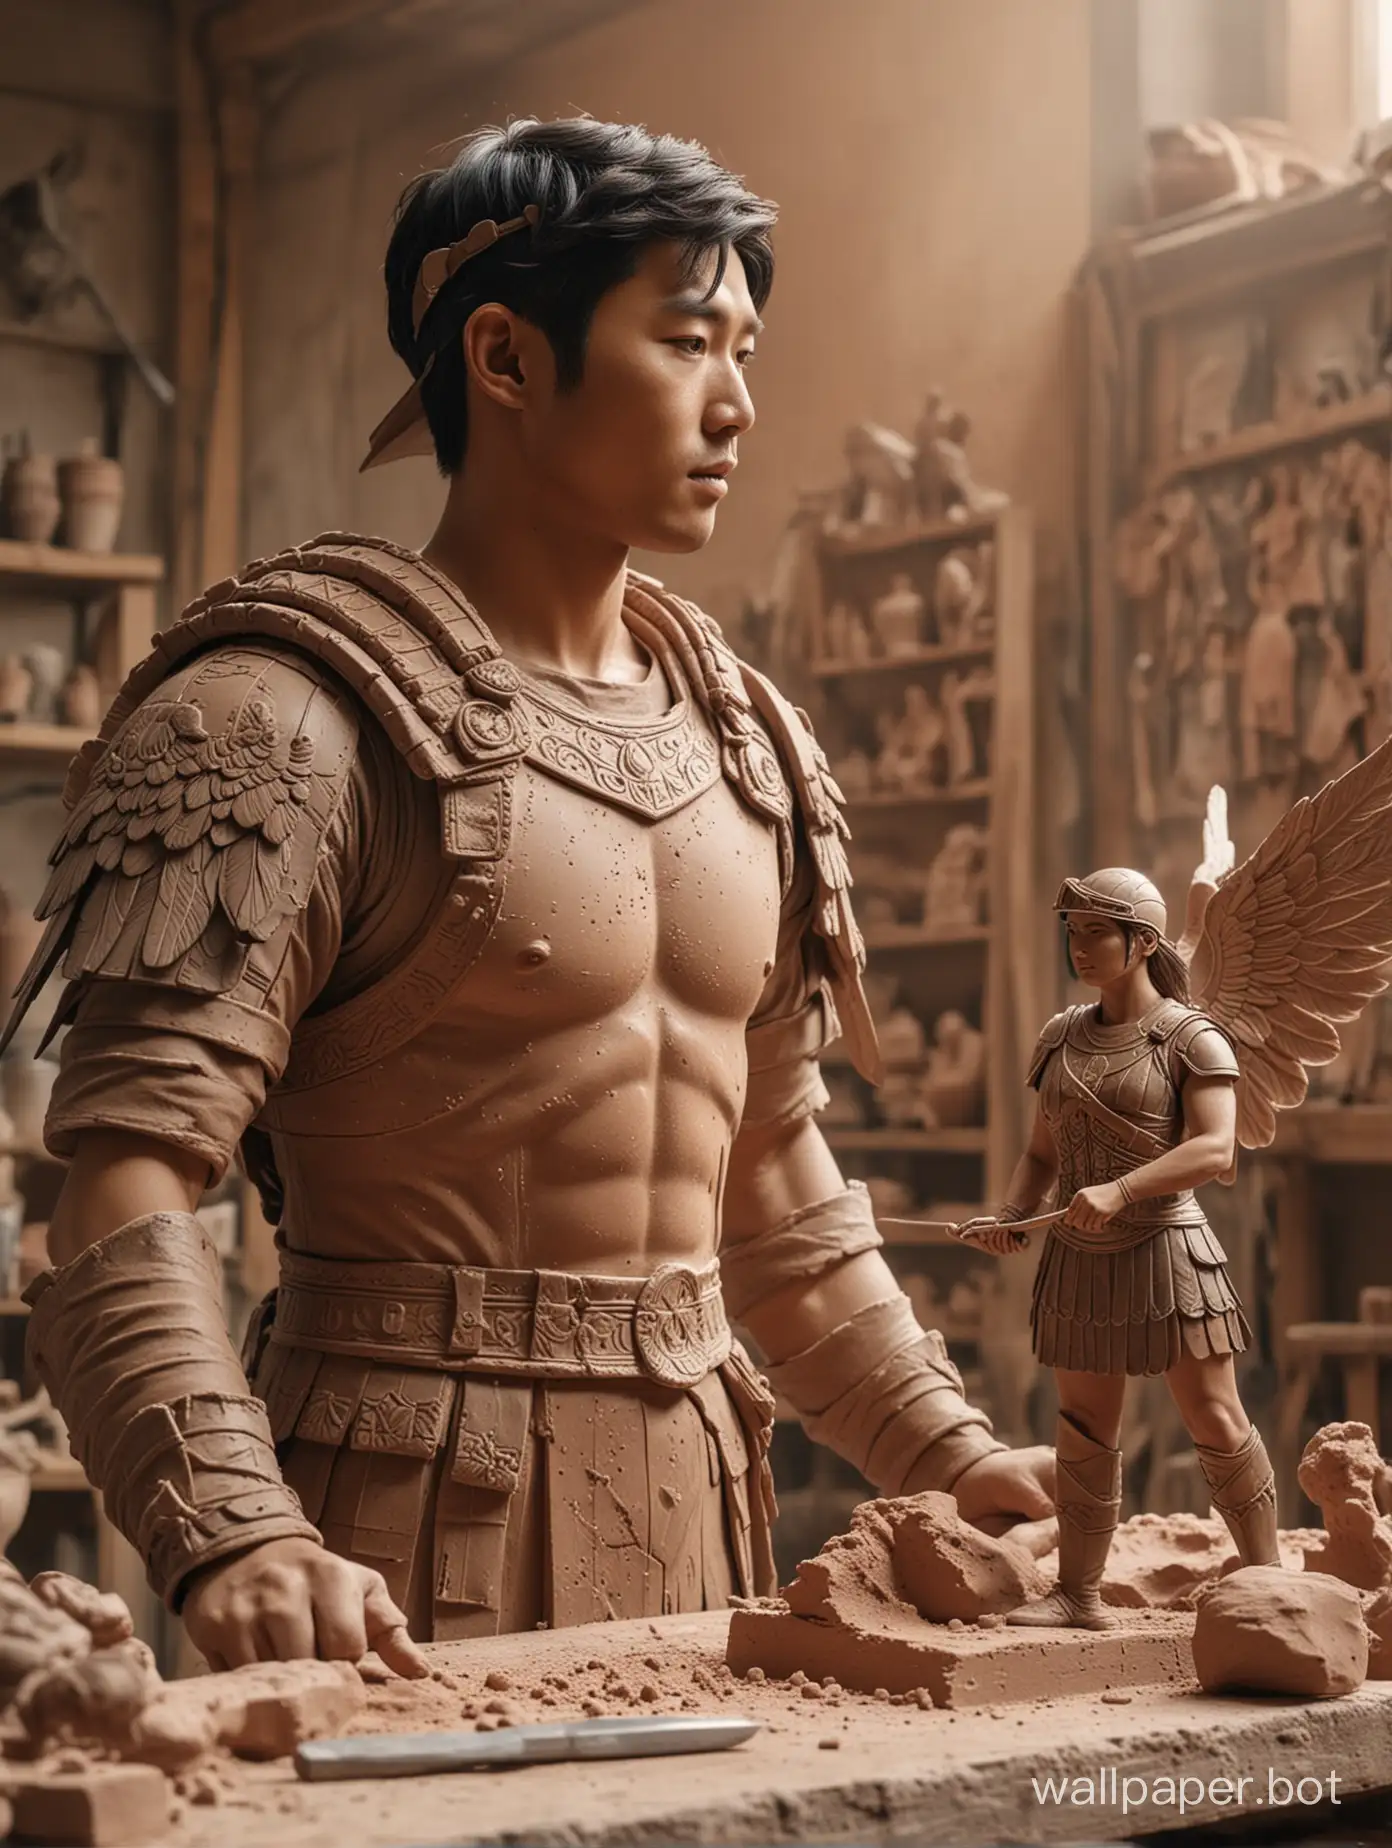 imagine a scene of 25 year old asian male  wearing a helmet with wings and roman soldier armor. He is  sculpting a clay figurine of a woman in a workshop.  cinematic, use creative, unrealistic, and explosive pastel colors to fill the background